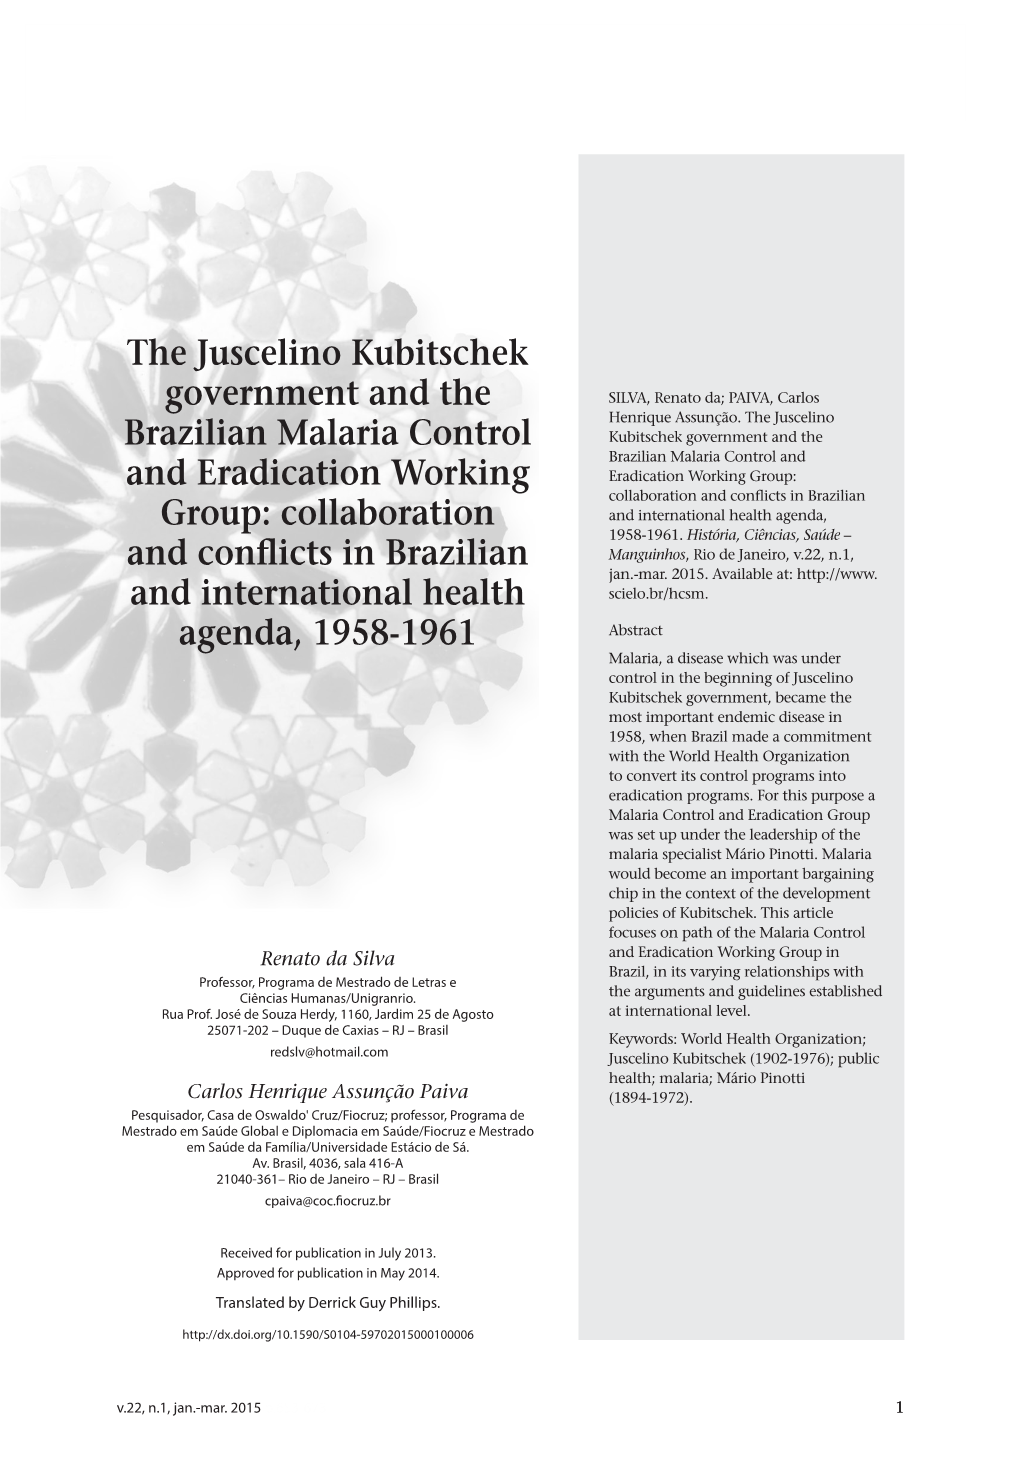 The Juscelino Kubitschek Government and the Brazilian Malaria Control and Eradication Working Group